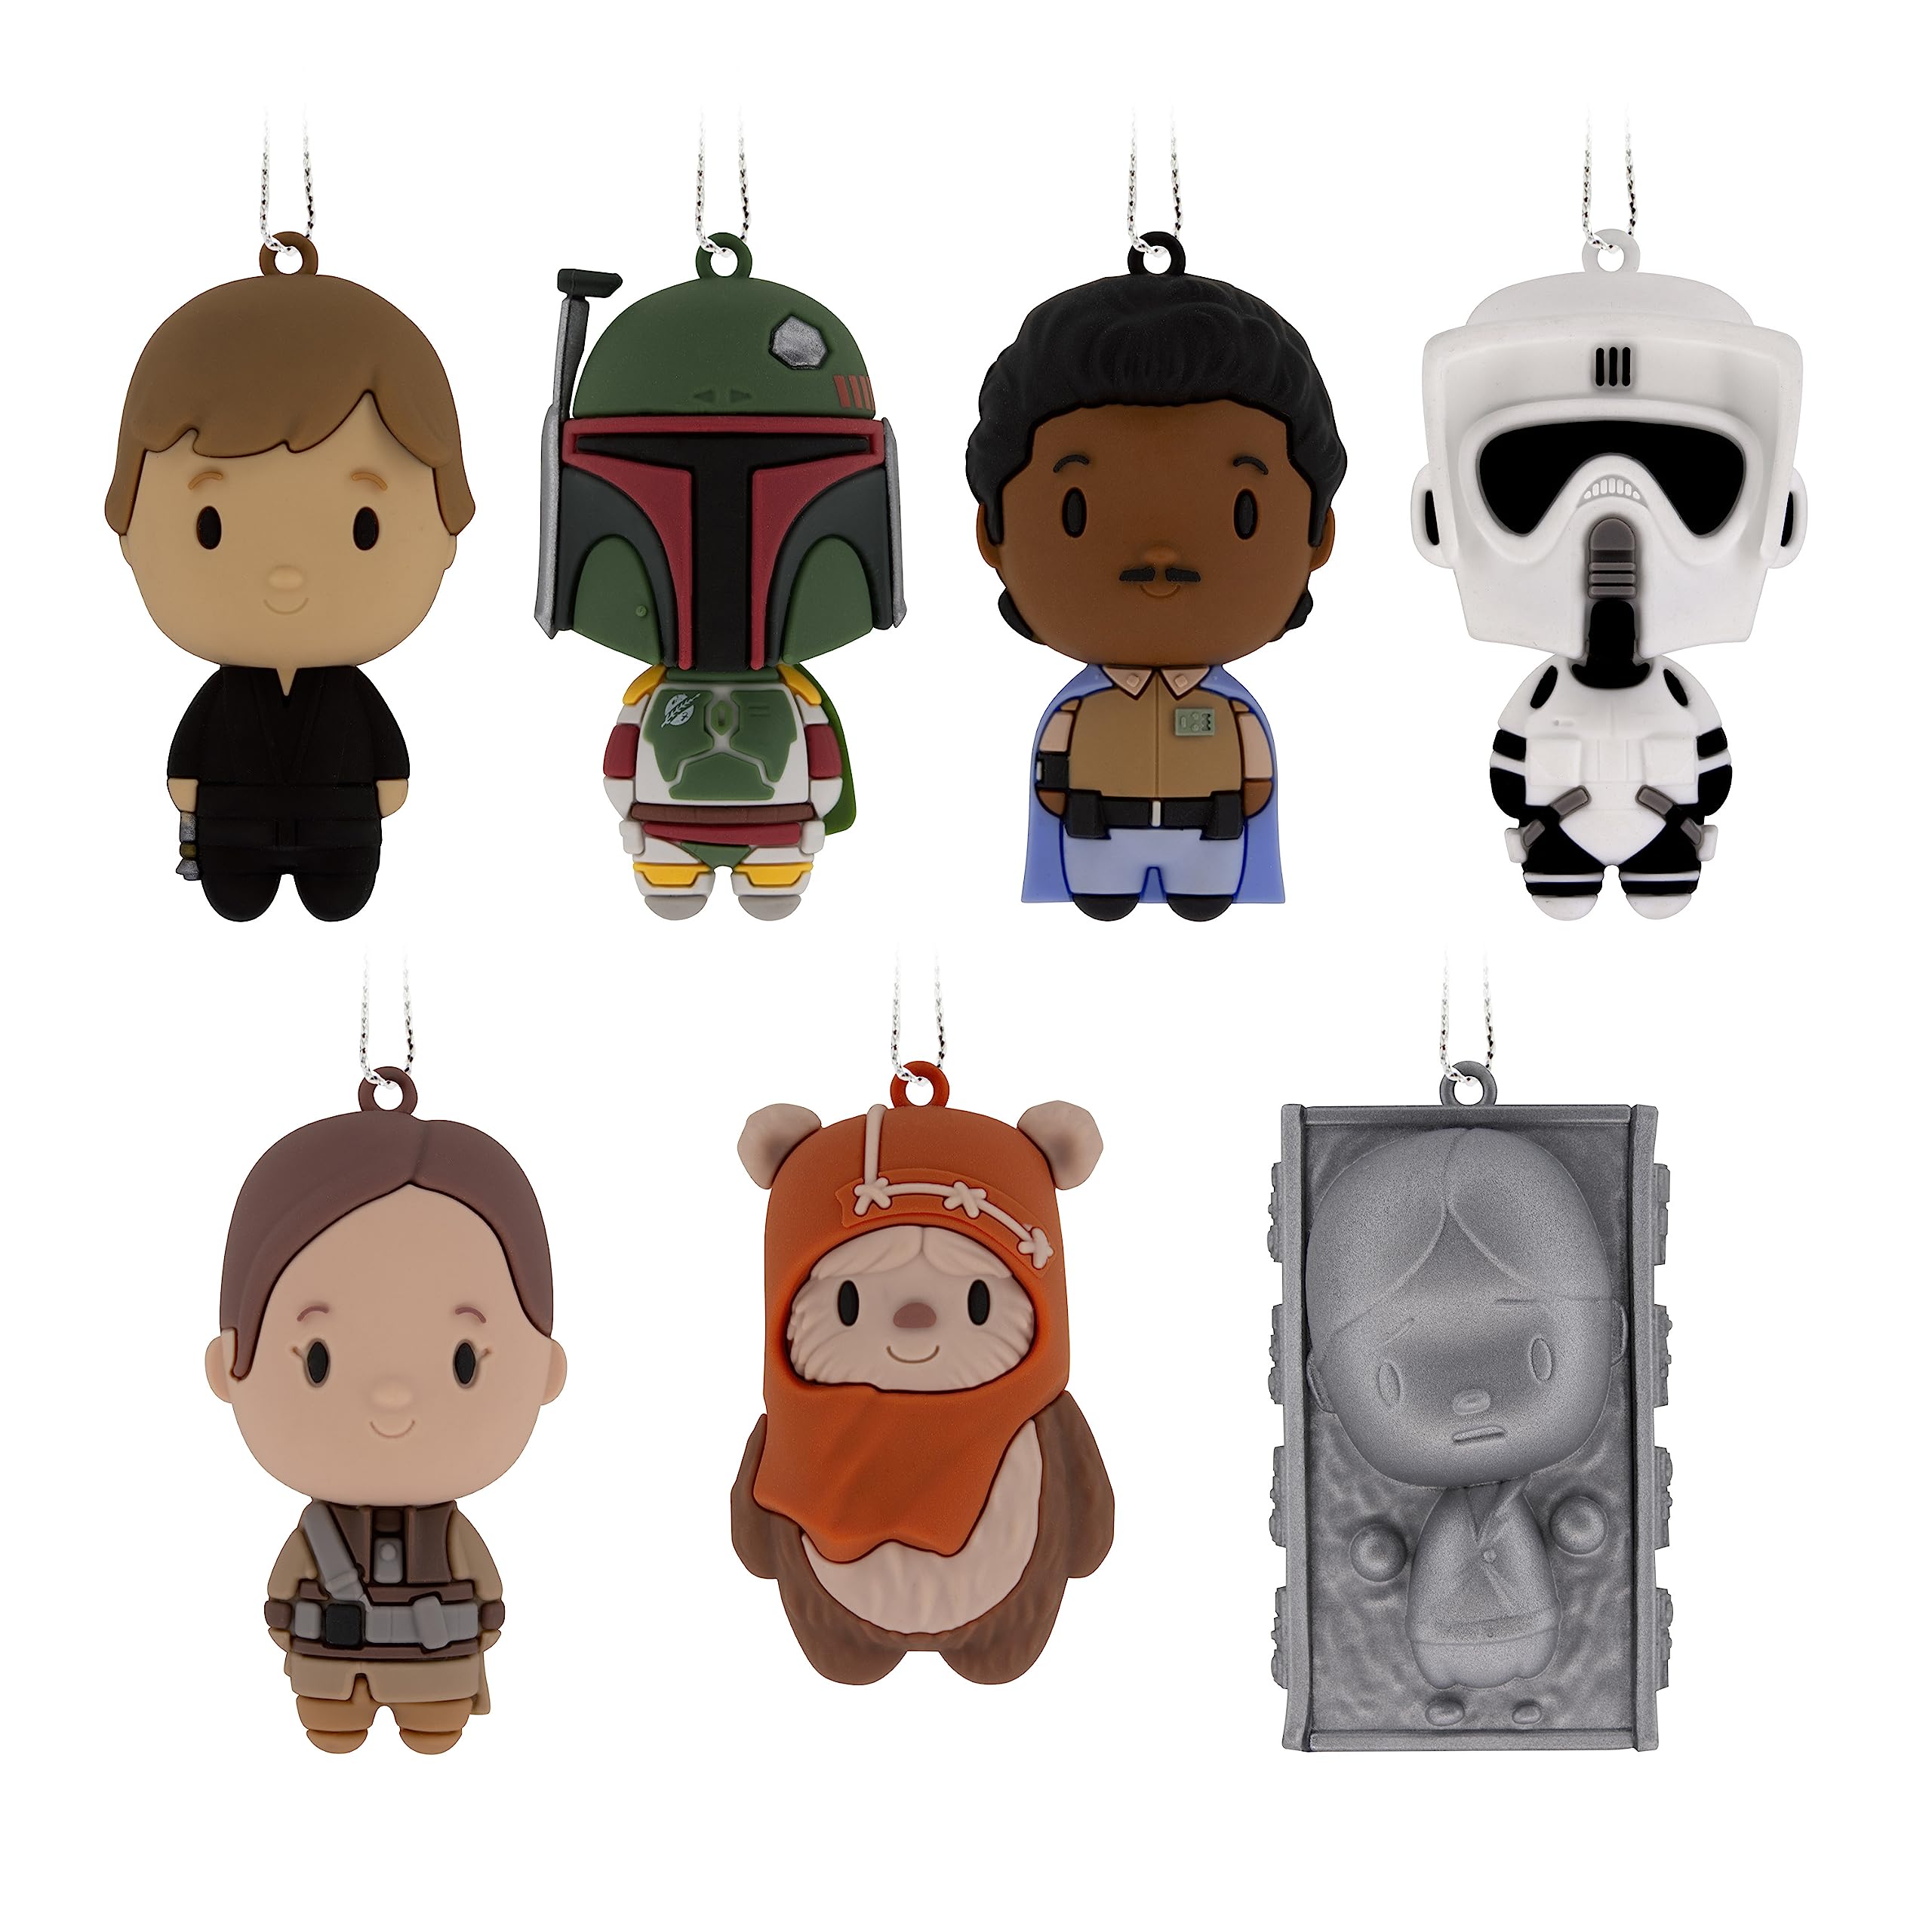 2-Count Hallmark Star Wars Mystery Ornaments $2.98 ($1.49 each) + Free Shipping w/ Prime or on $35+